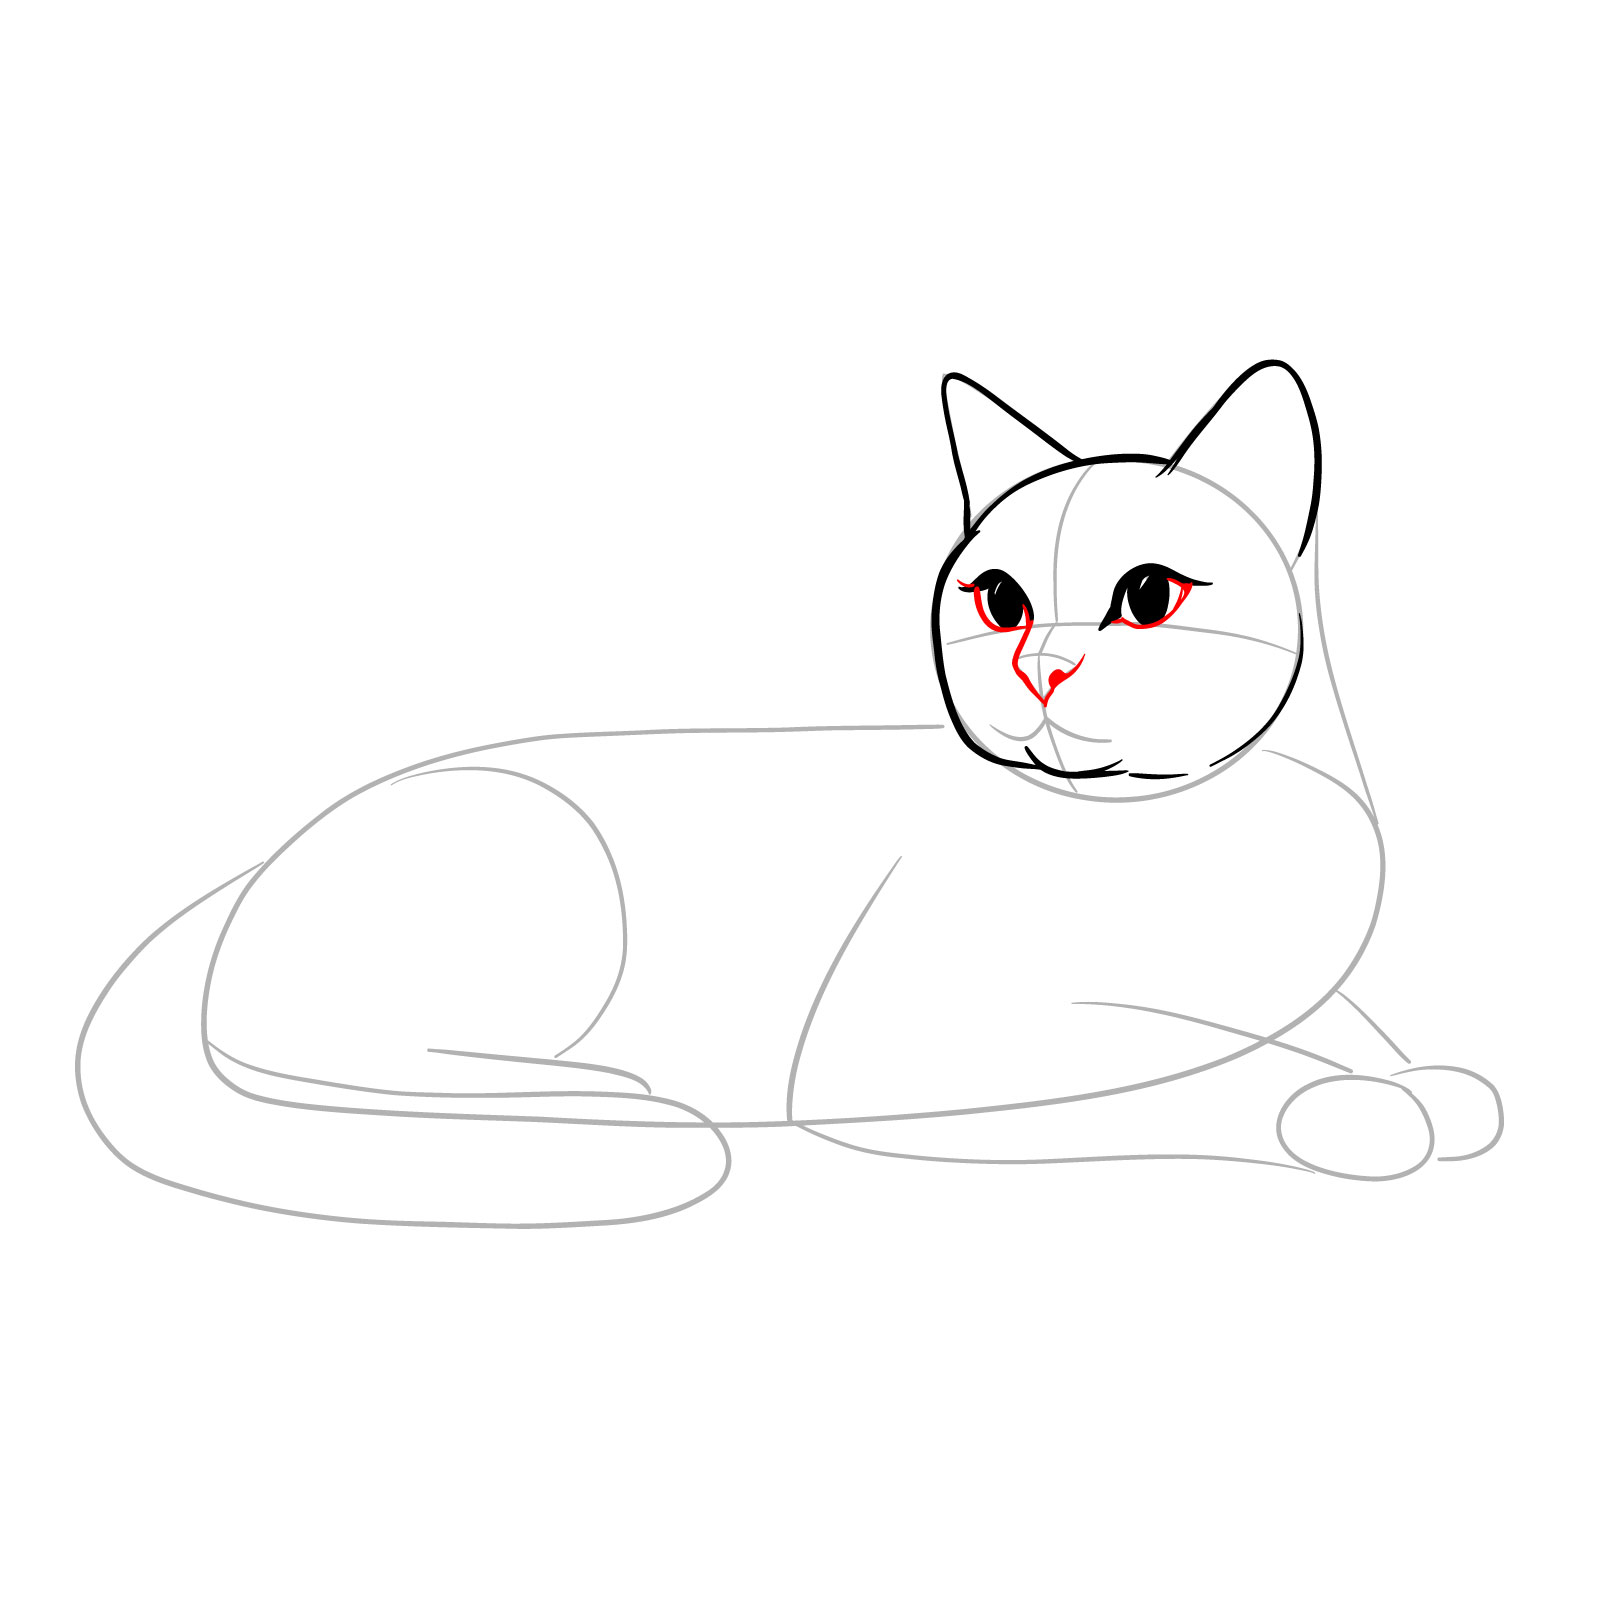 Finalizing the eyes and drawing the nose on a side-view sketch of a lying cat - step 07